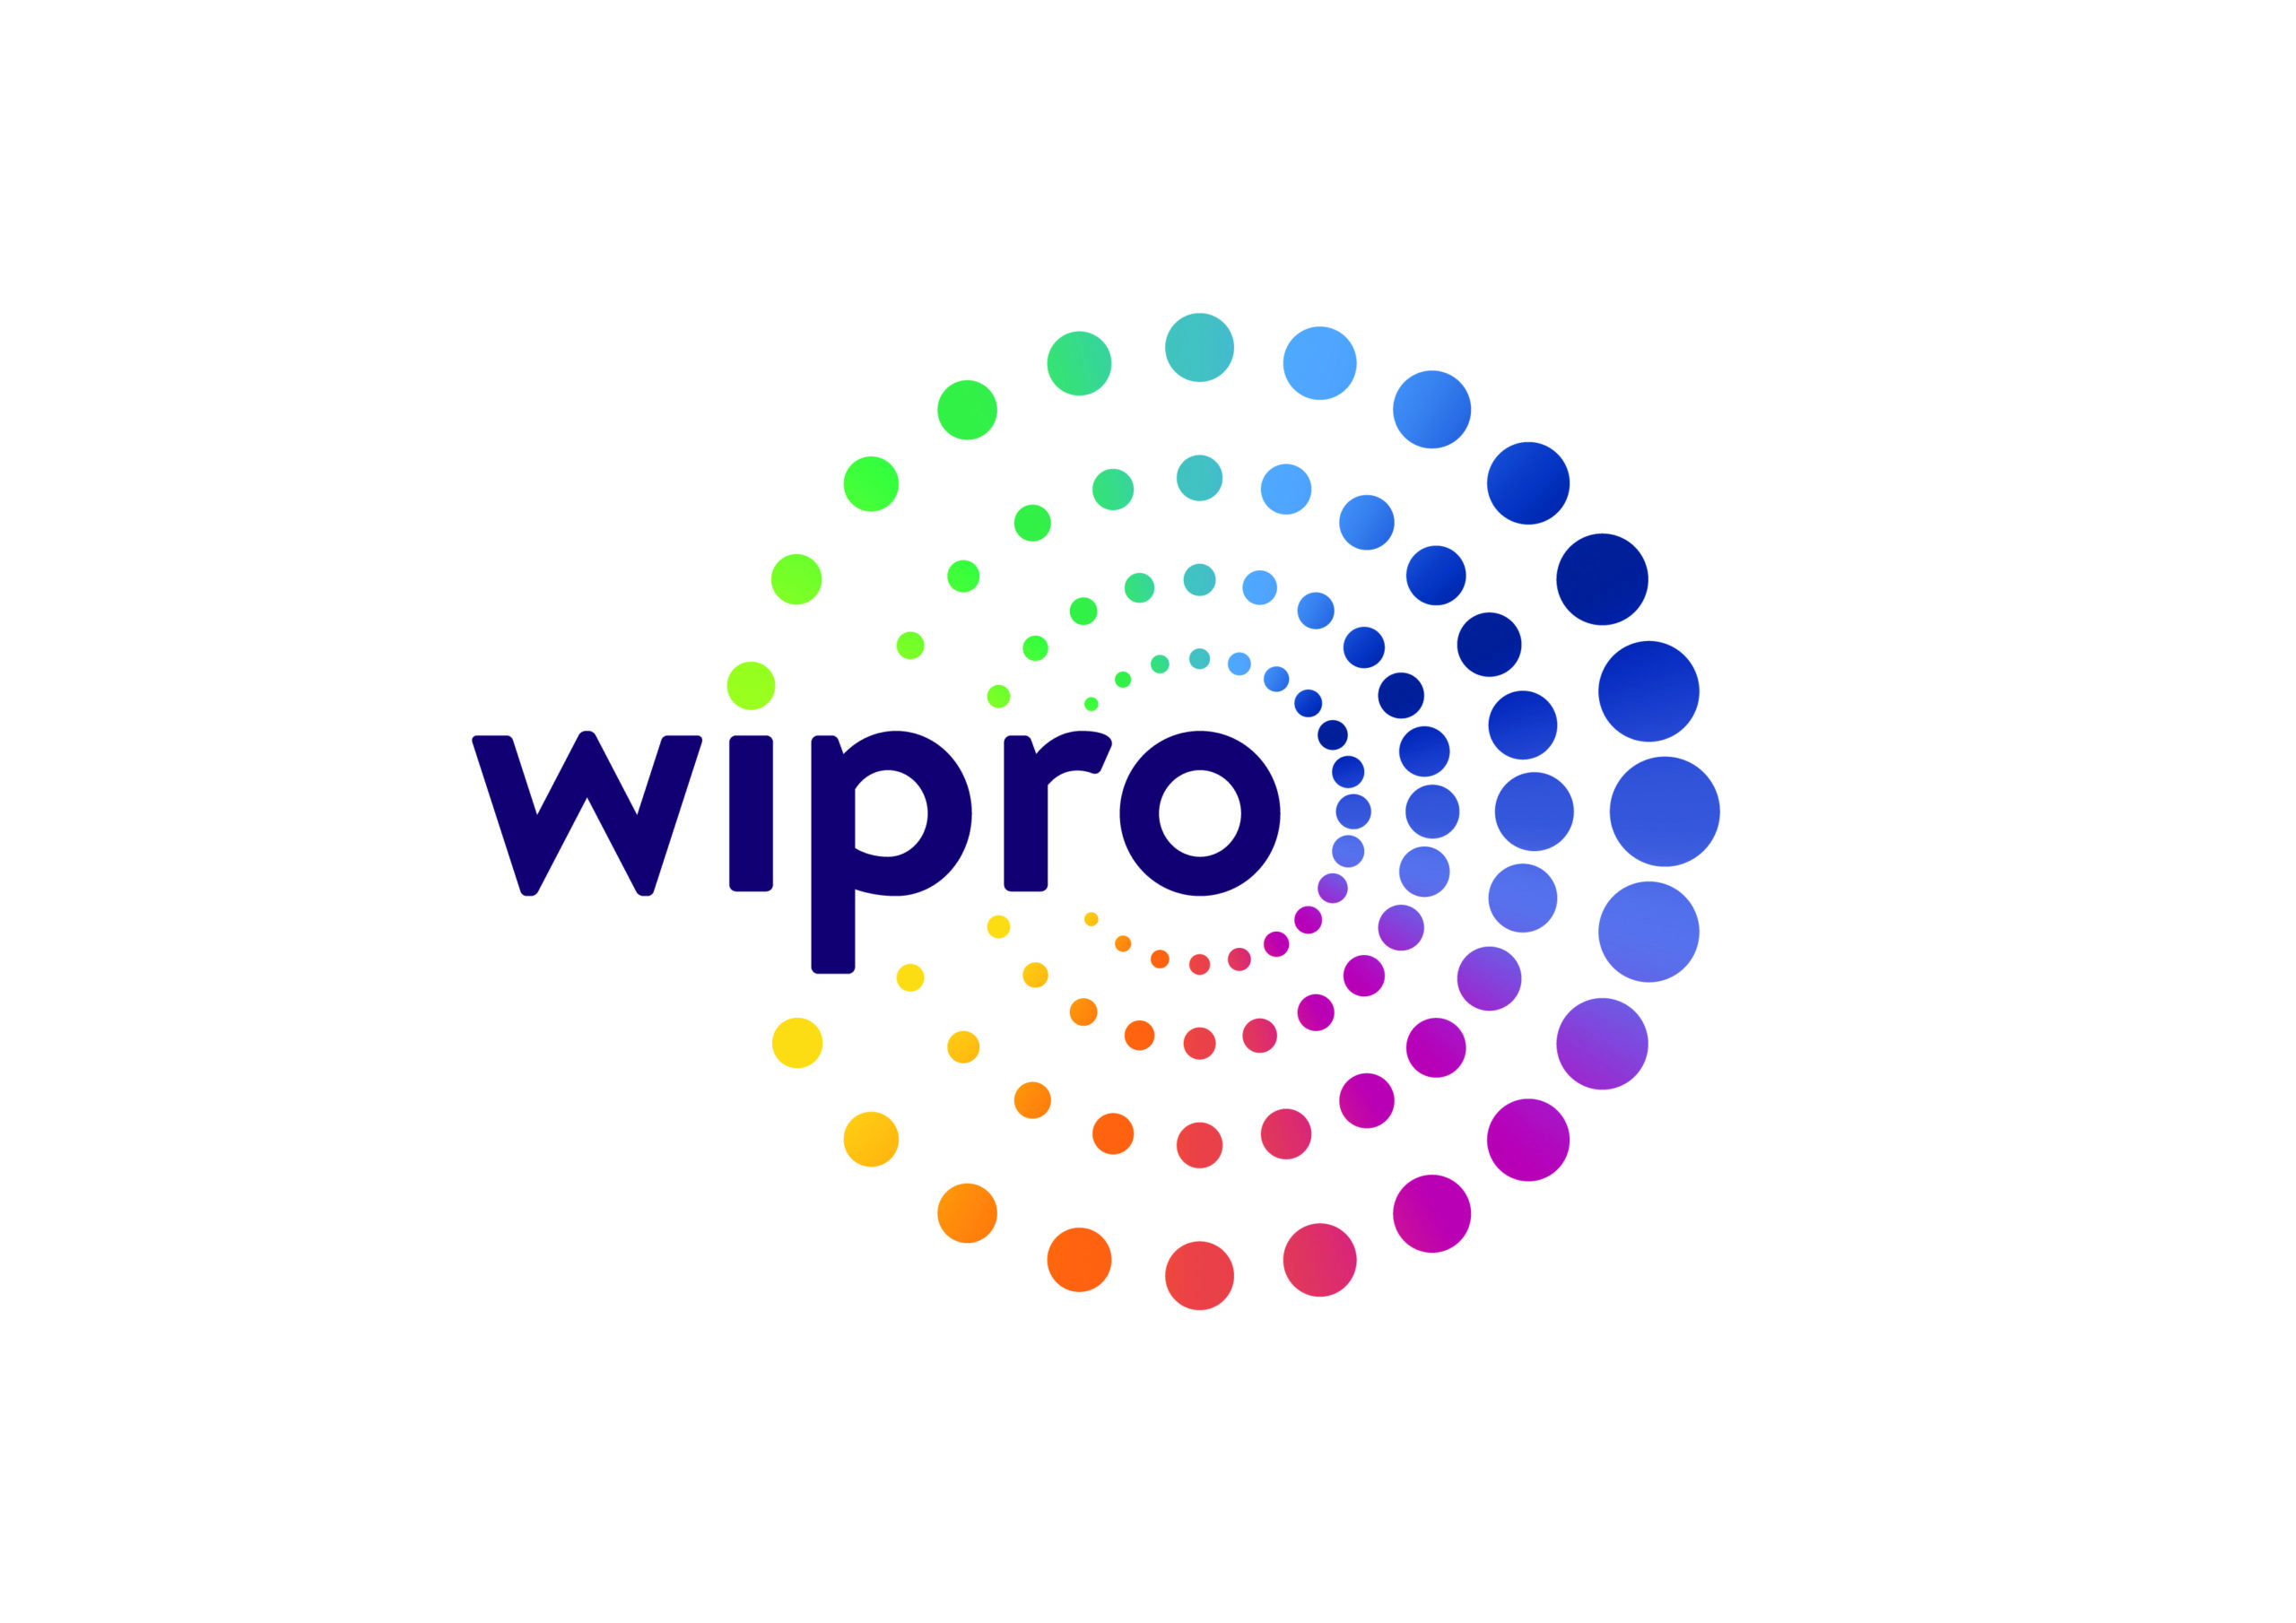 Wipro makes it to World's Most Ethical Companies list for 10th straight year